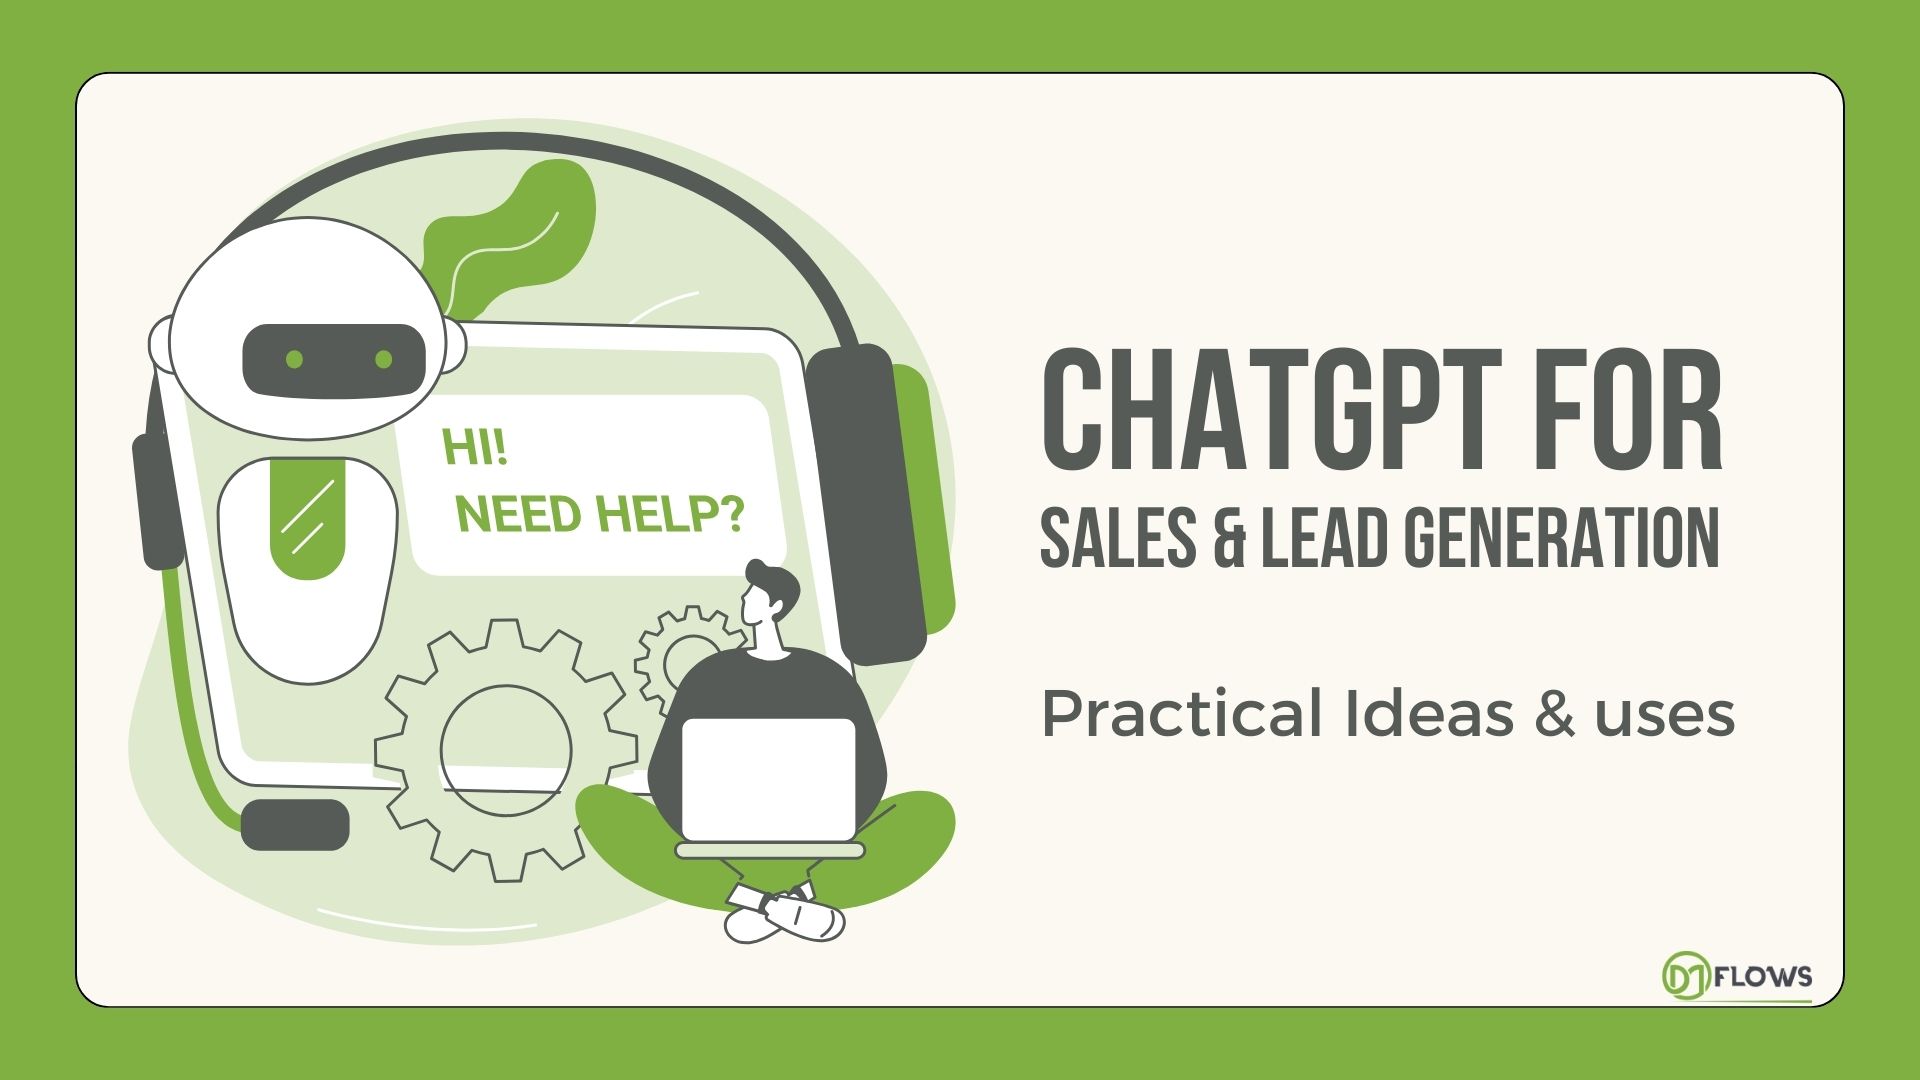 How To Use ChatGPT For Sales And Lead Generation